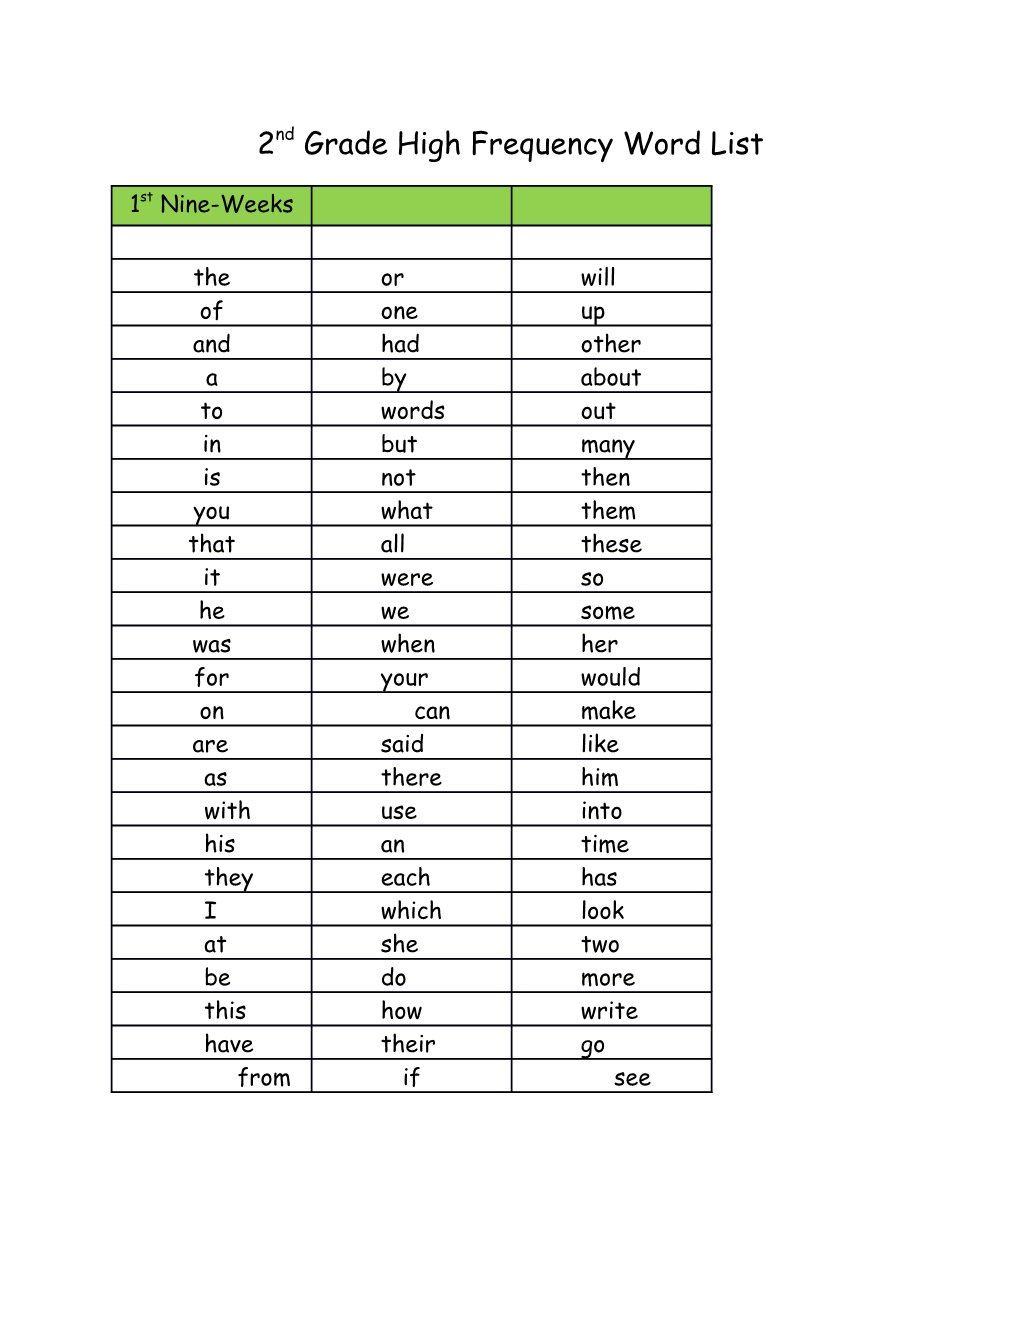 2Nd Grade High Frequency Word List